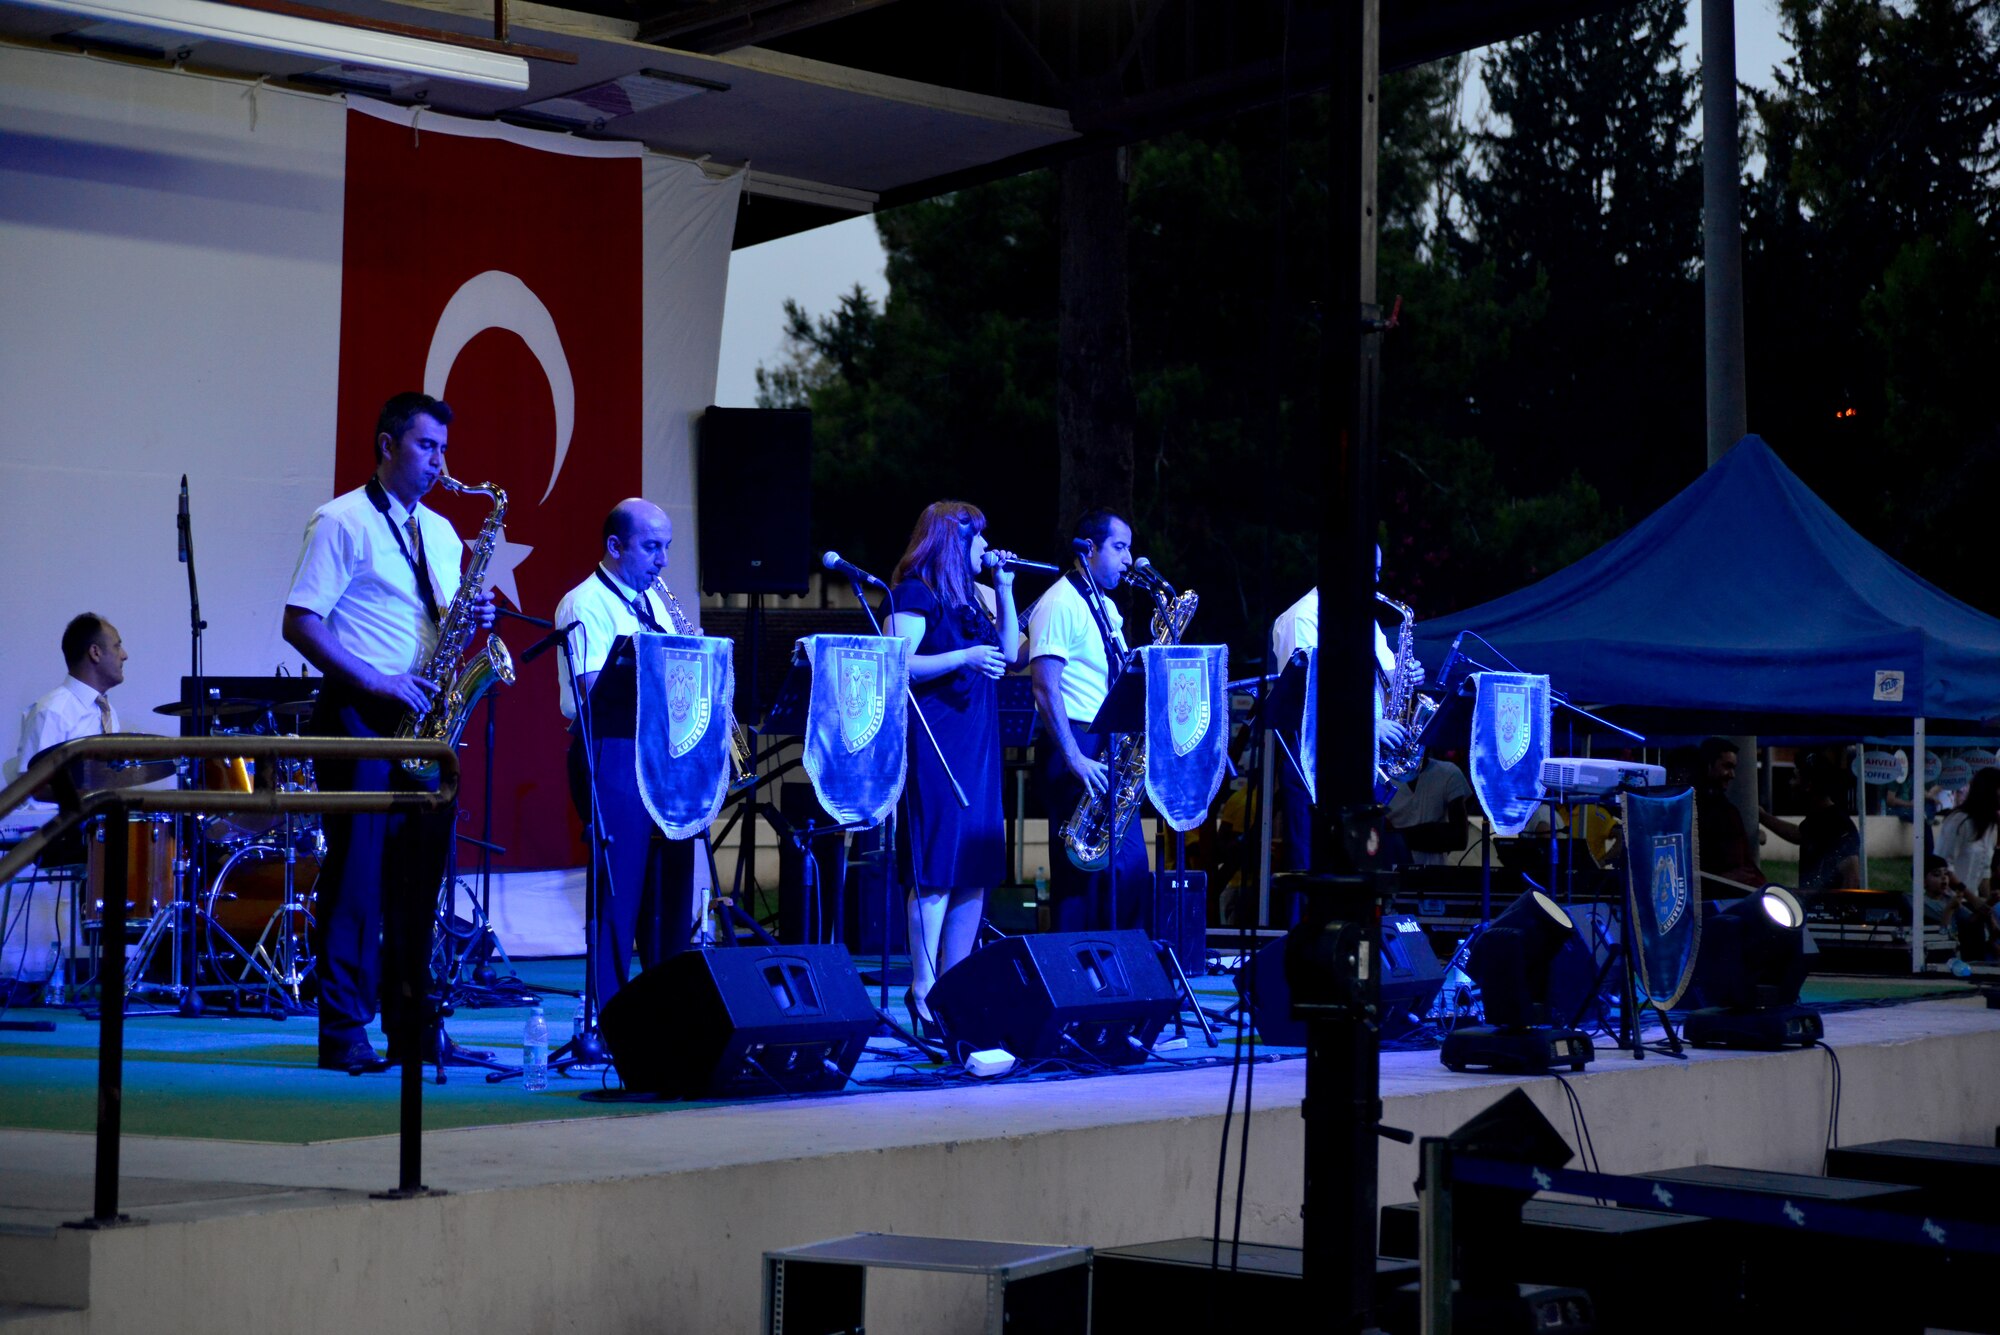 The Turkish Air Force Jazz Band plays for an American and Turkish audience in Arkadas Park June 9, 2013, at Incirlik Air Base, Turkey. The Turkish air force celebrated its 102nd anniversary by inviting members the Incirlik community to view static displays and enjoy a performance from the band. (U.S. Air Force photo by Staff Sgt. Eric Summers Jr./Released)